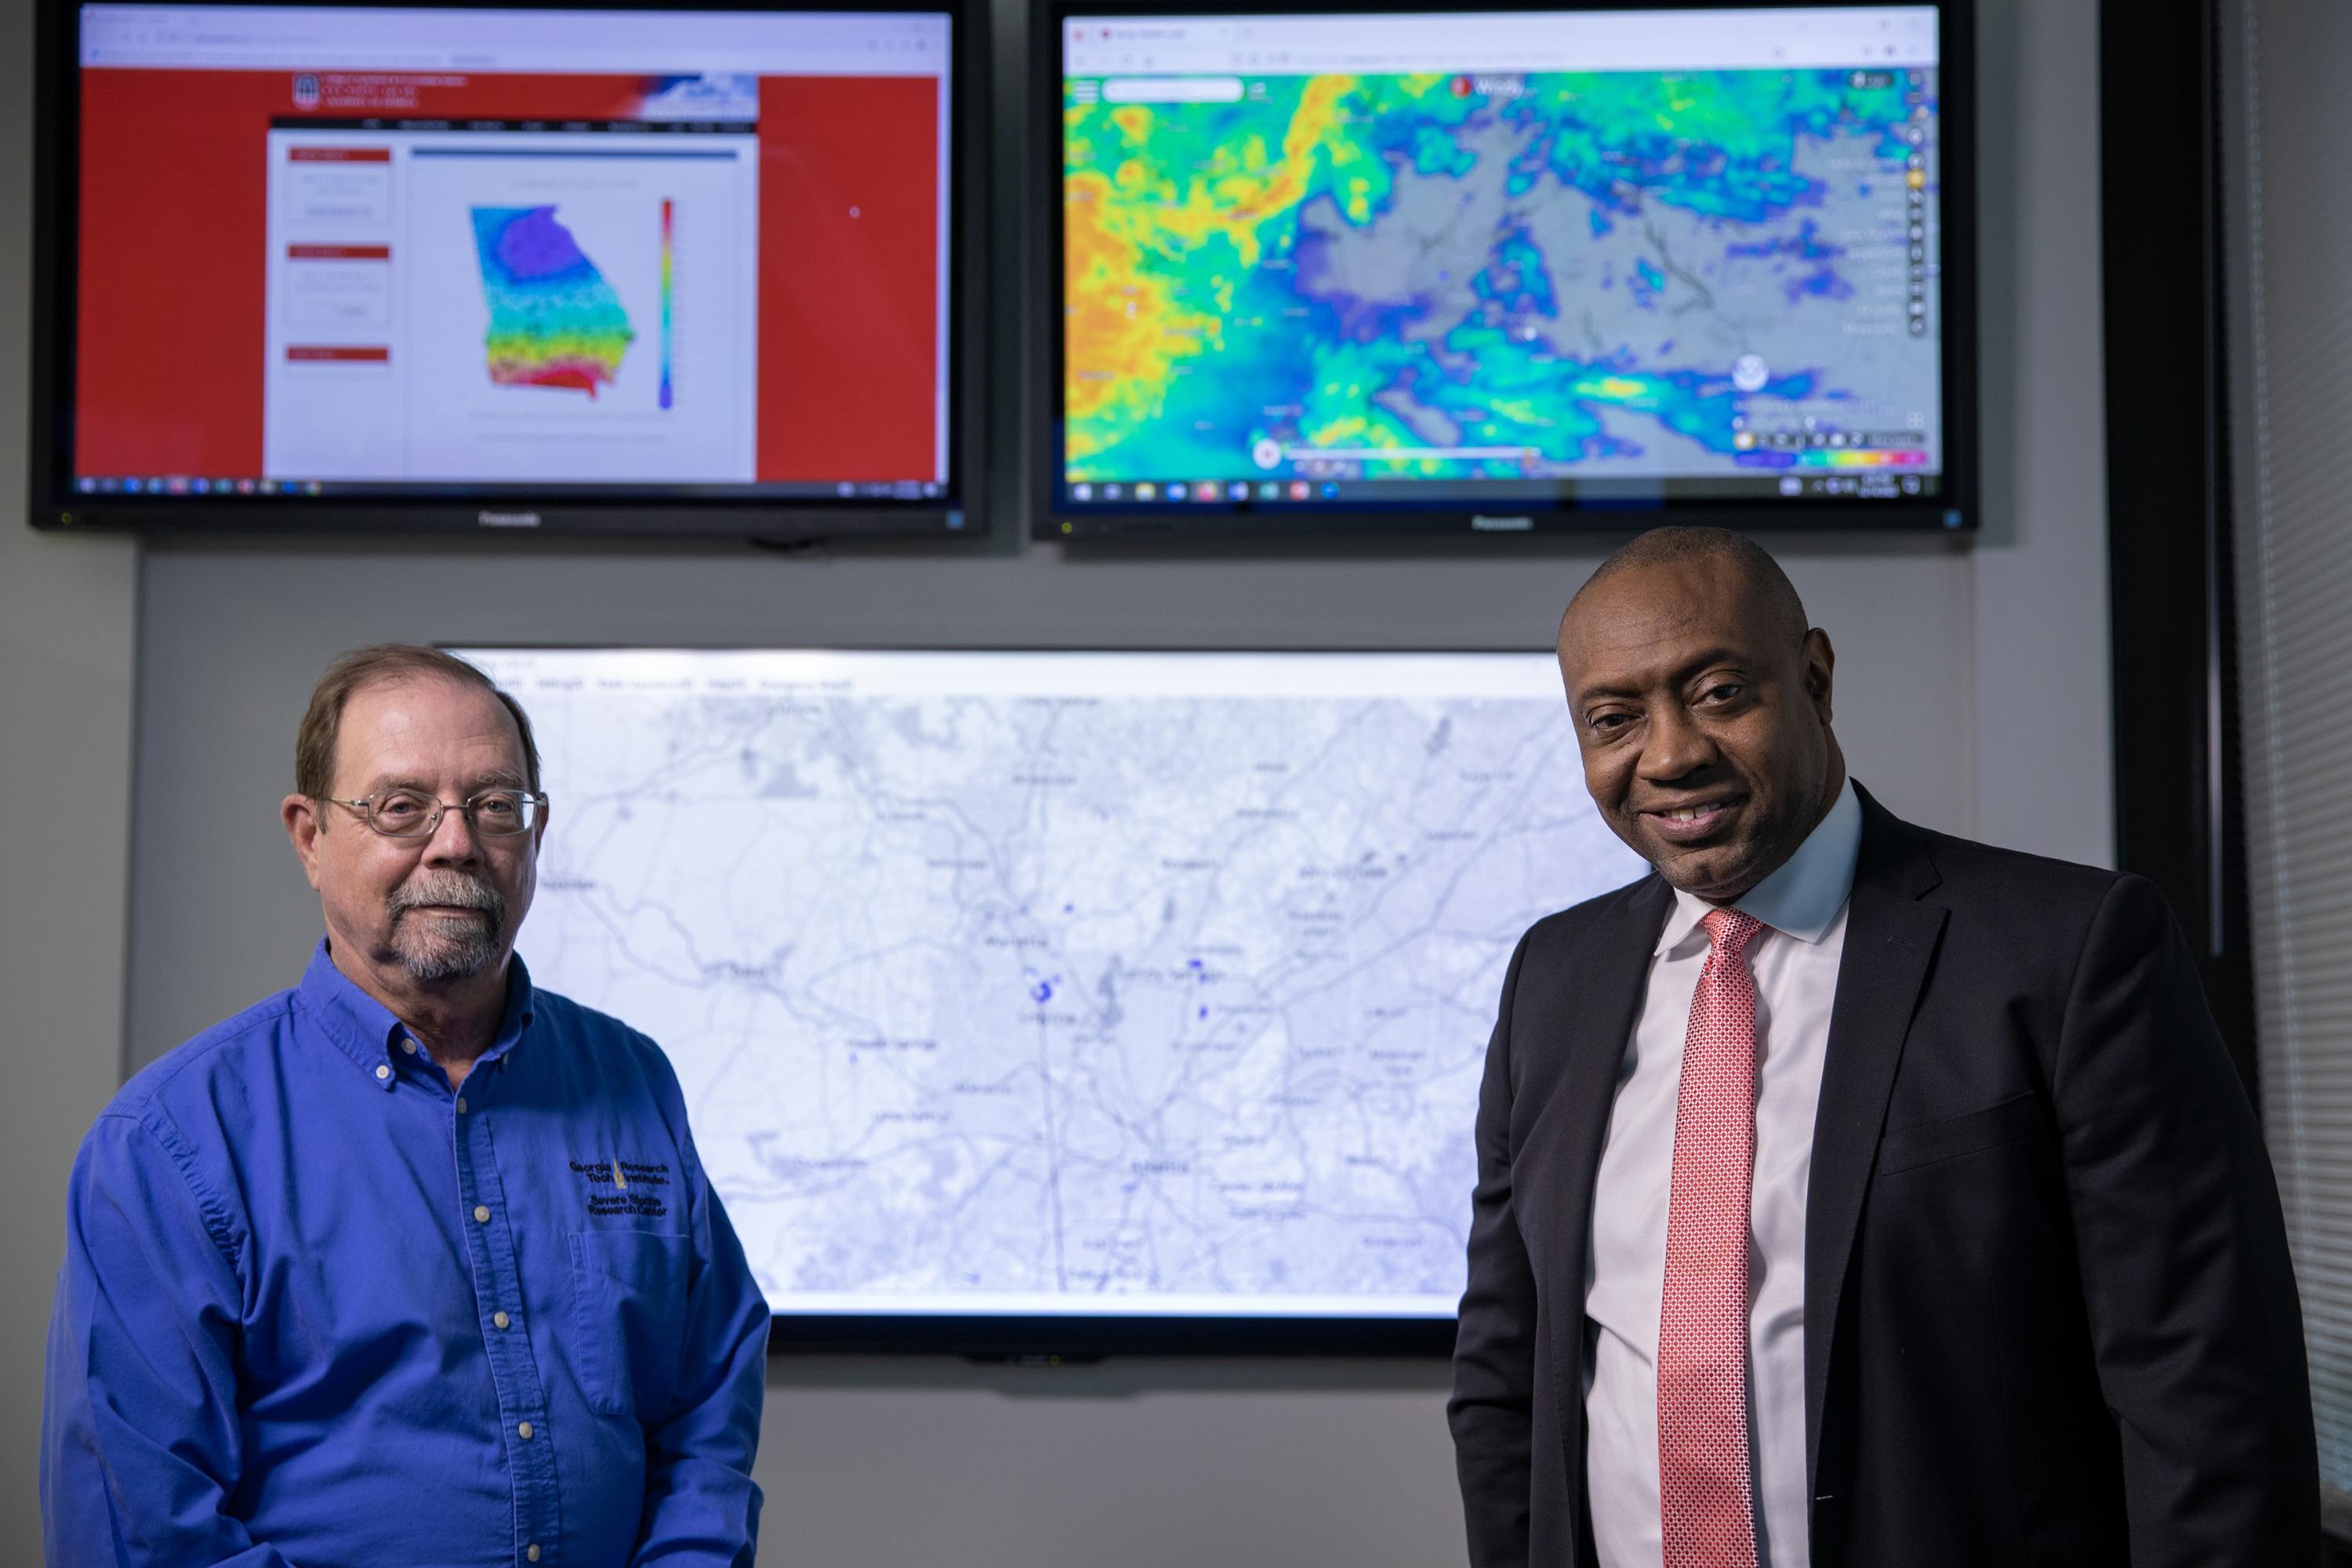 Researchers John Trostel (GTRI) and Marshall Shepherd (University of Georgia) will be using the new weather radar to provide better information about north Georgia weather - and for research and education at Georgia Tech and the University of Georgia. (Credit: Sean McNeil, GTRI)